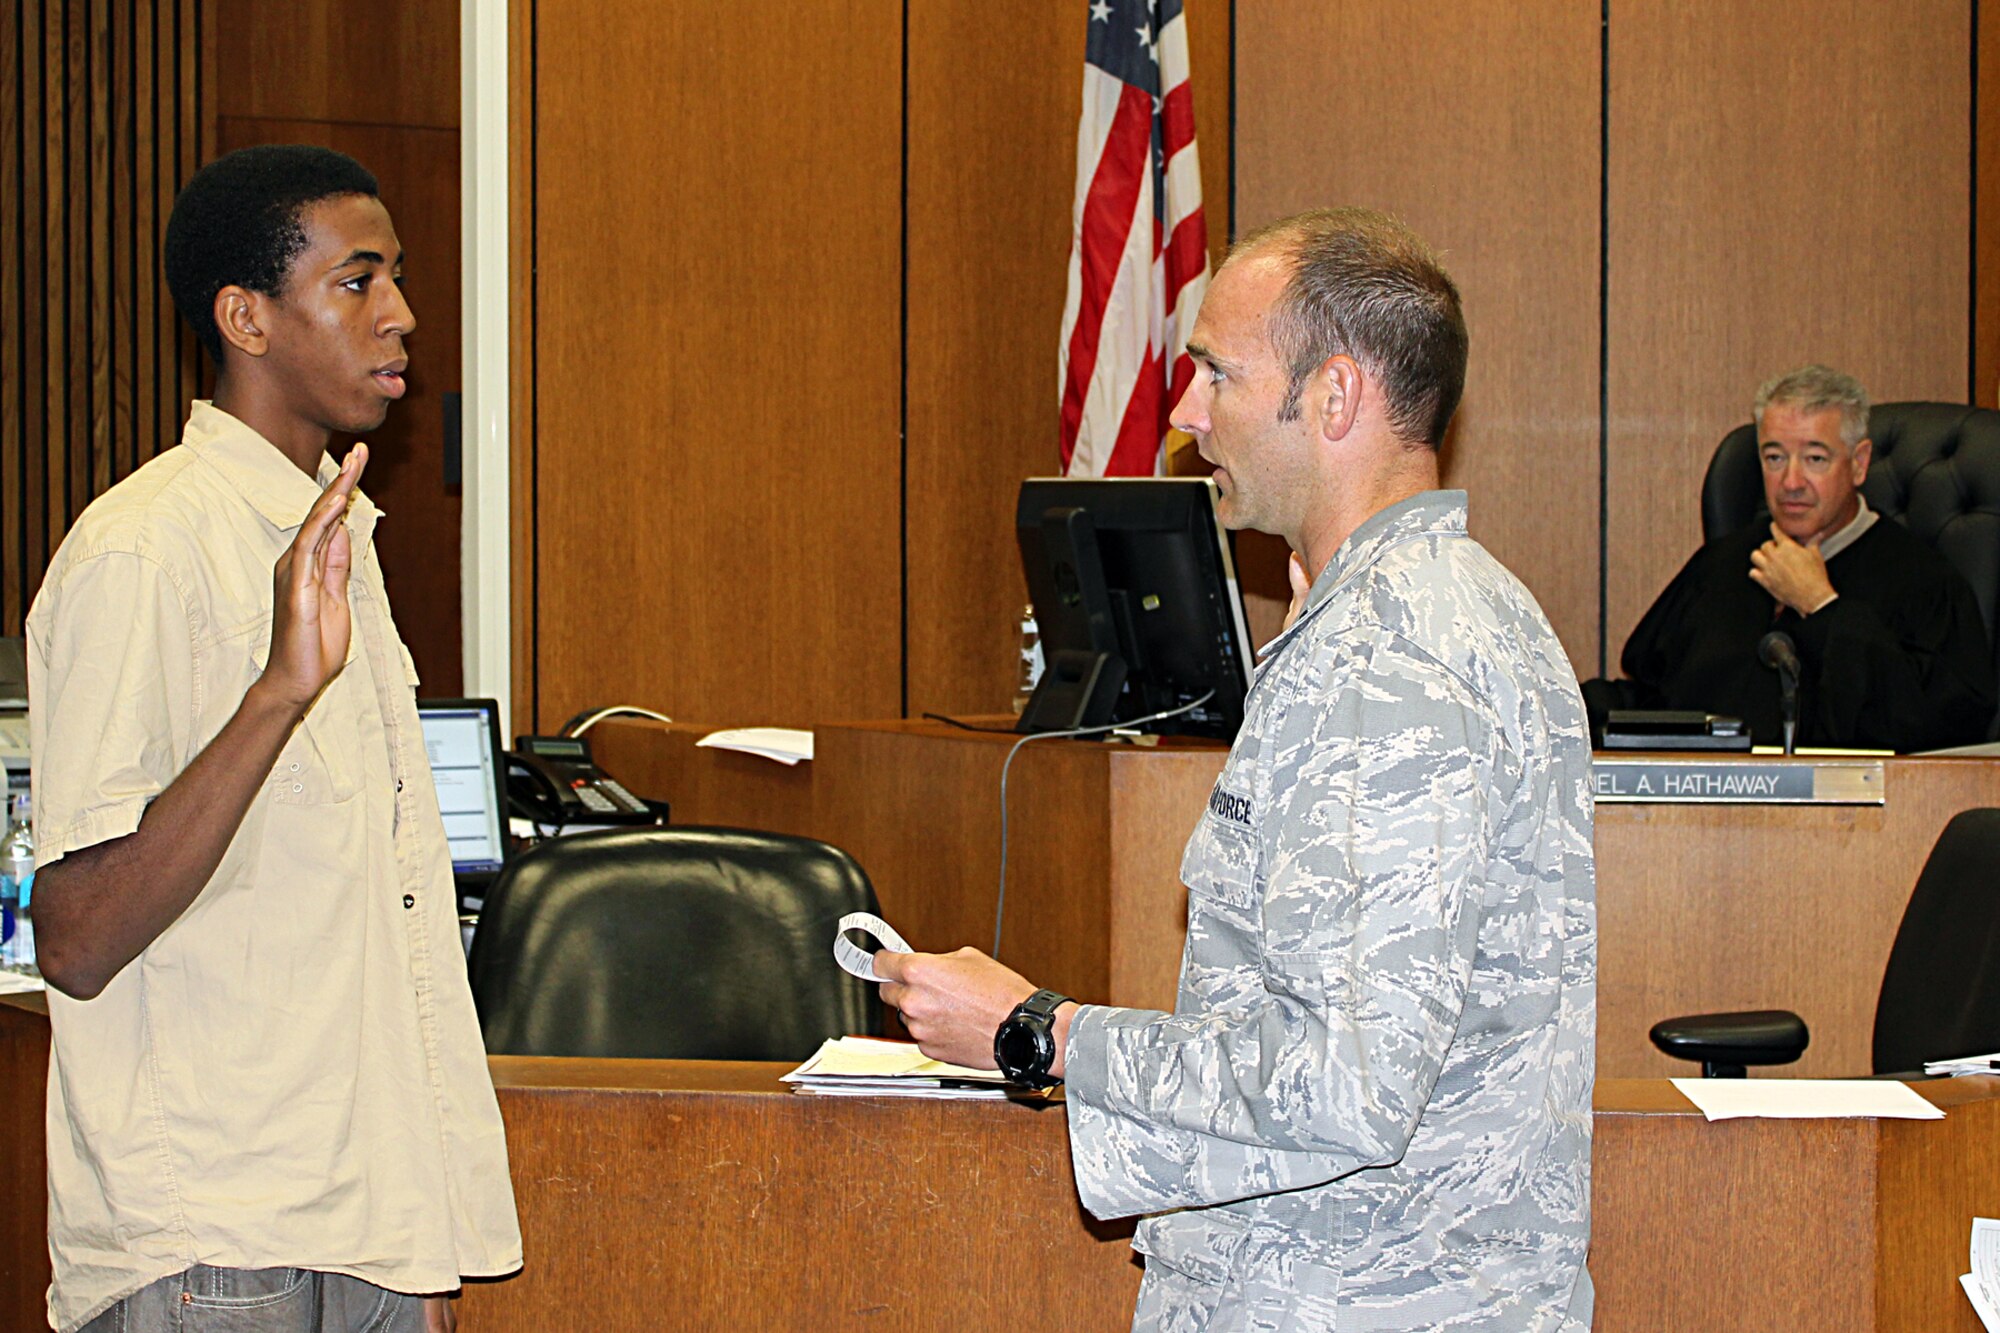 Torrey Gray is sworn in as a new recruit in the Michigan Air National Guard by 1st Lt. Robert McLean in the courtroom of Circuit Court Judge Daniel Hathaway in Detroit, July 15, 2014. Gray was sworn in at the court so that his mother, Tonya Gray, a Wayne County Sheriff’s deputy who works at the court, could watch her son take the oath of office. Tonya Gray is also a member of the Michigan Army National Guard. McLean is the commander of the 107th Weather Flight at Selfridge Air National Guard Base, Mich., where Torrey Gray will serve as a member of the 127th Force Support Squadron. (U.S. Air National Guard photo by Tech. Sgt. Dan Heaton)